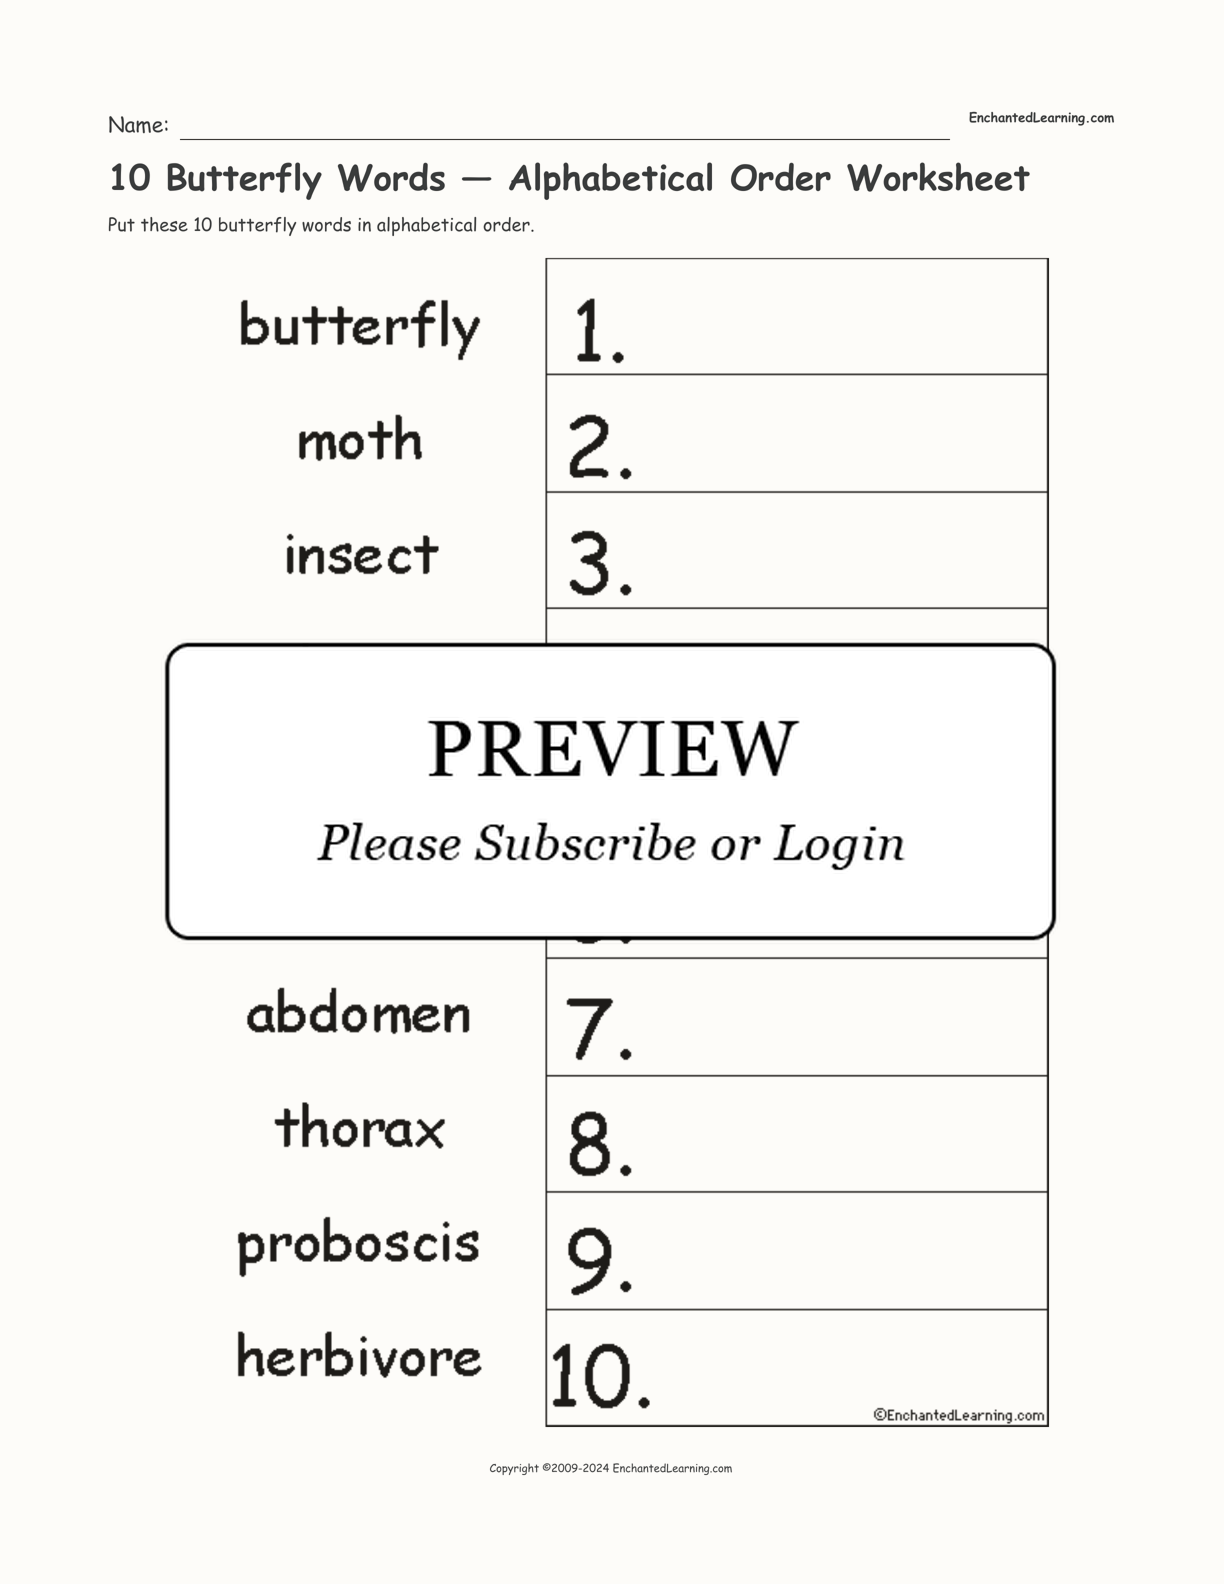 10 Butterfly Words — Alphabetical Order Worksheet interactive worksheet page 1